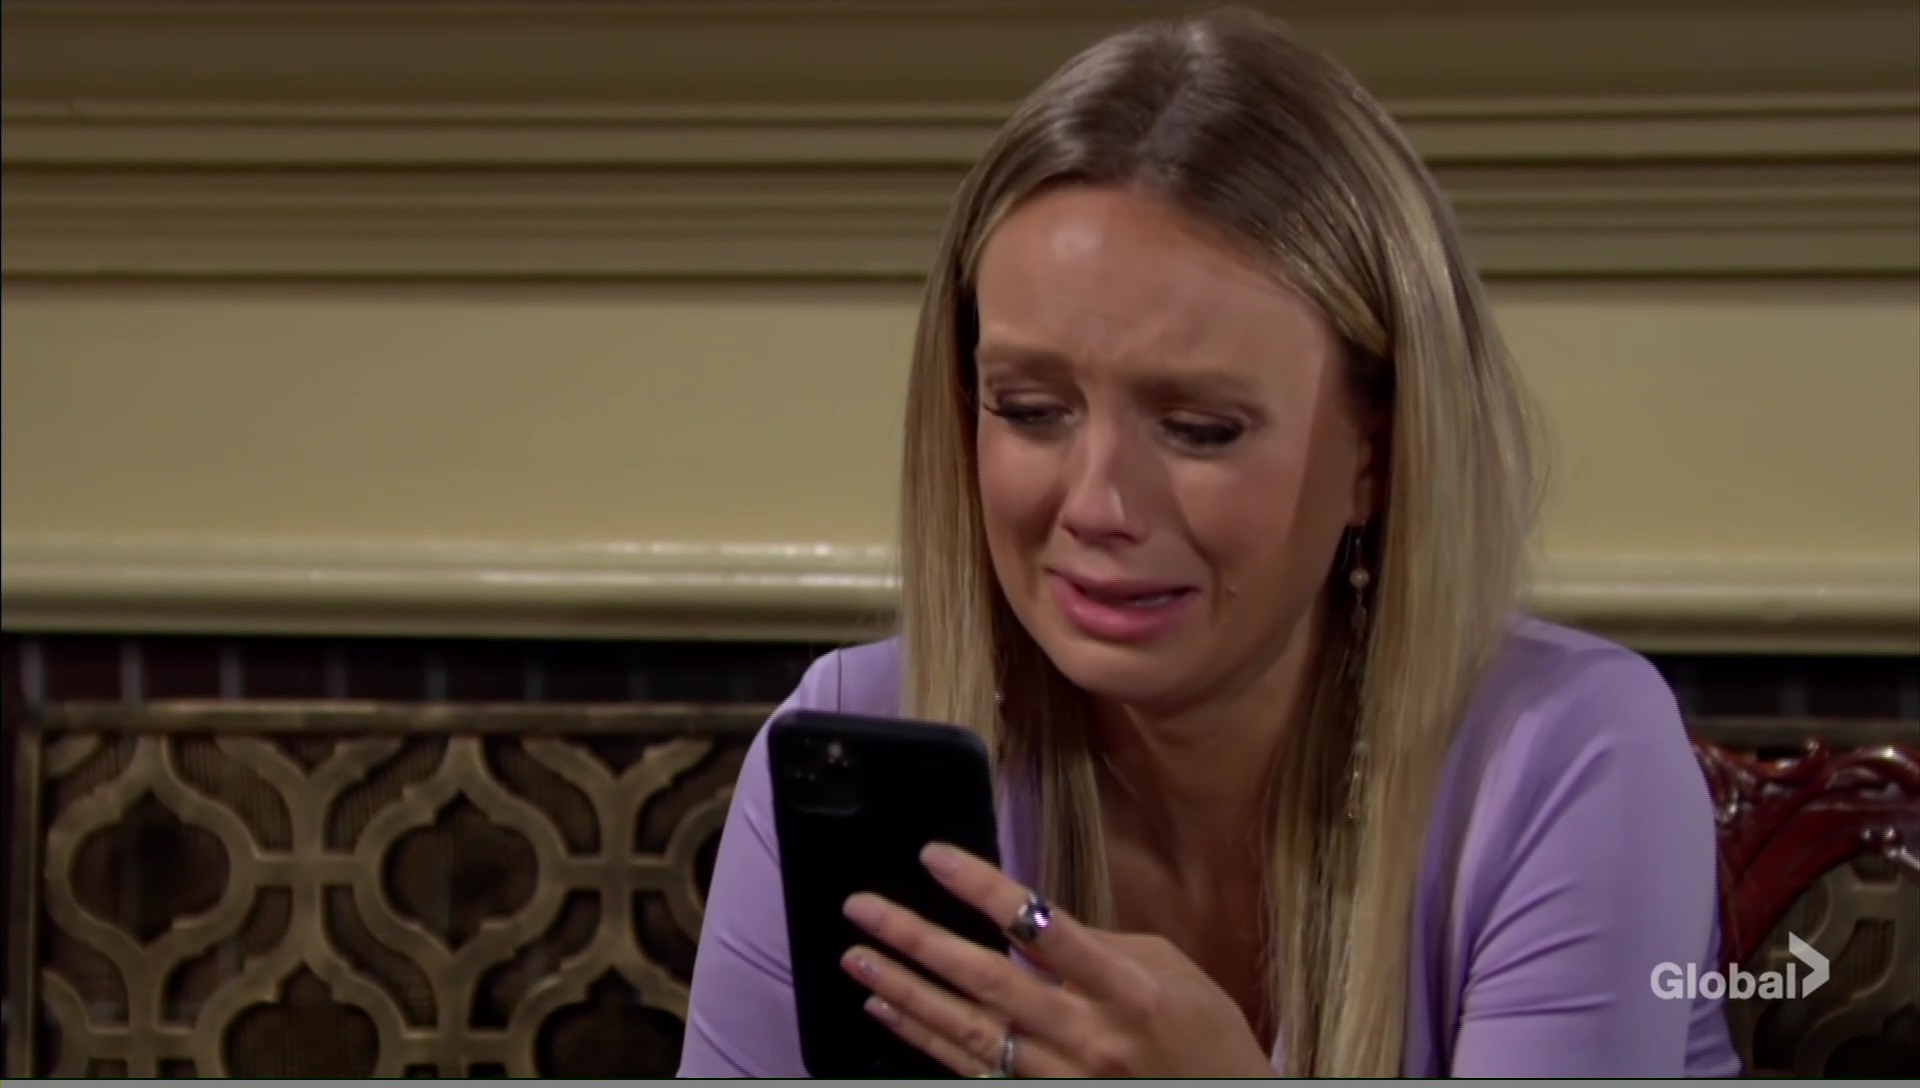 abby sobbing chance dead watch young restless cbs soapsspoilers